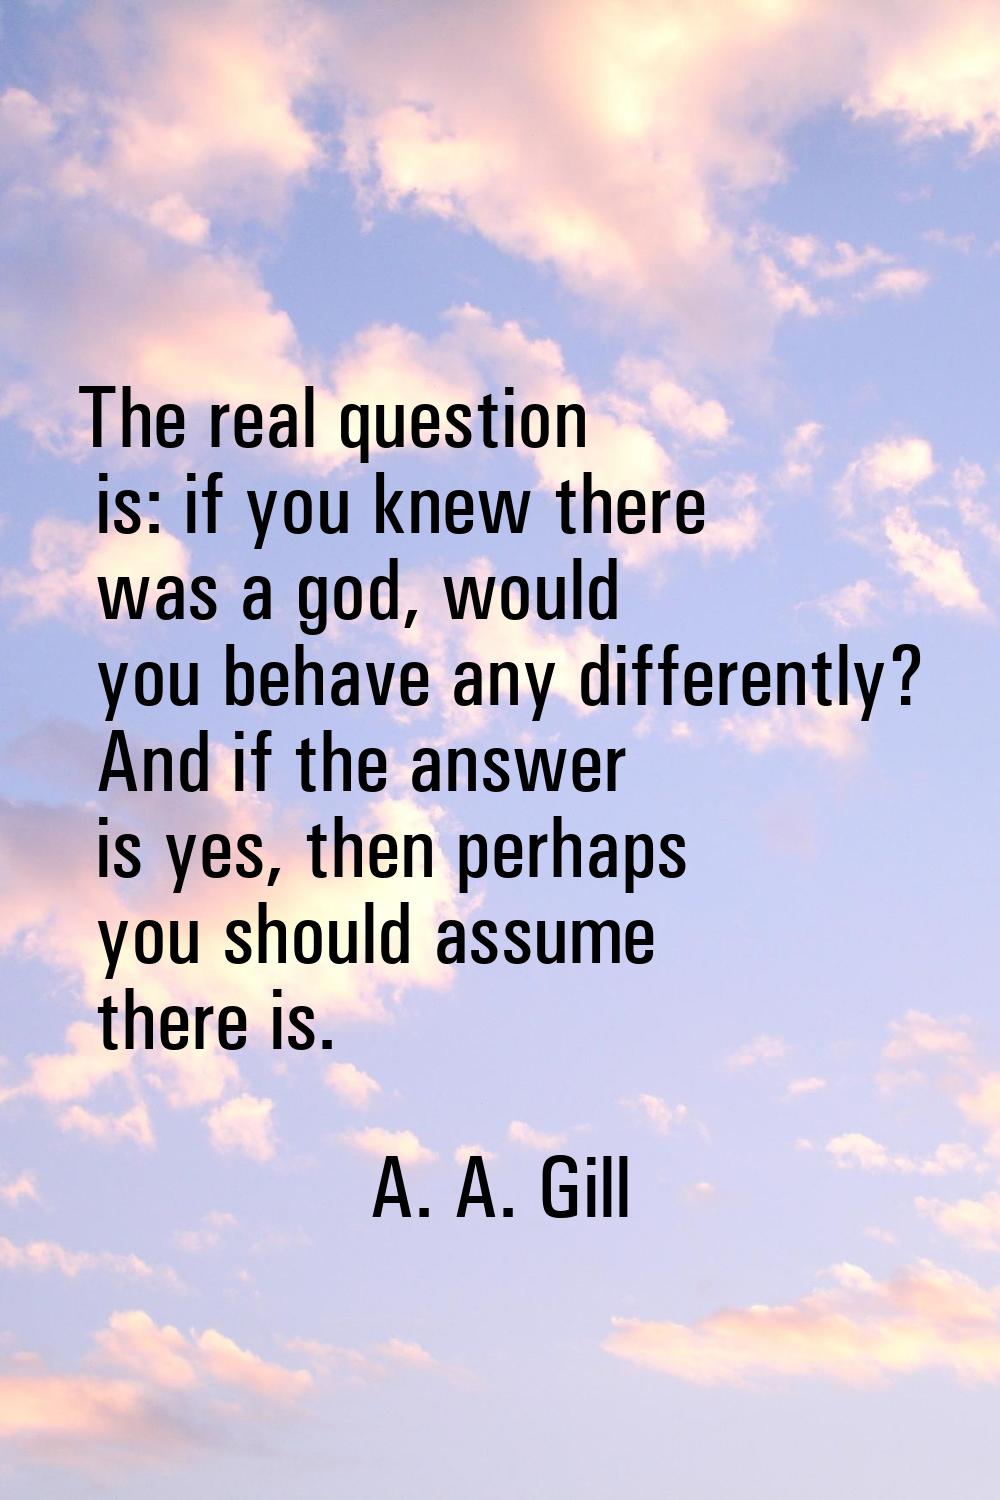 The real question is: if you knew there was a god, would you behave any differently? And if the ans